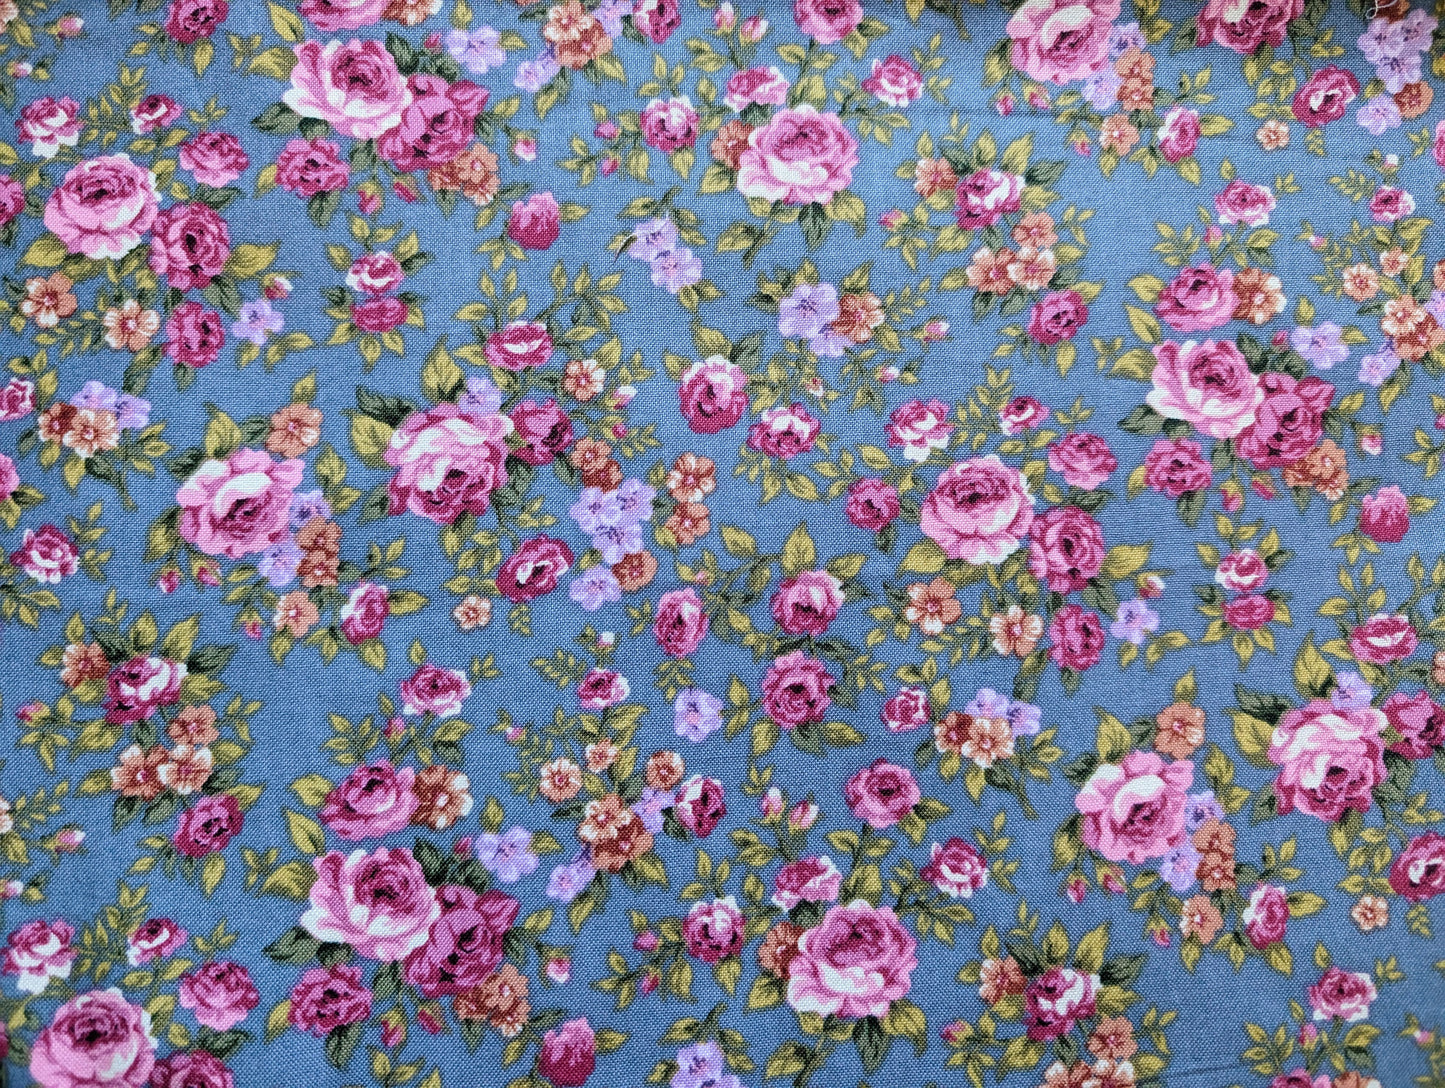 Vintage Fabric - "Romantic Roses"  on Cotton by Fabrics for Perfect Occasions